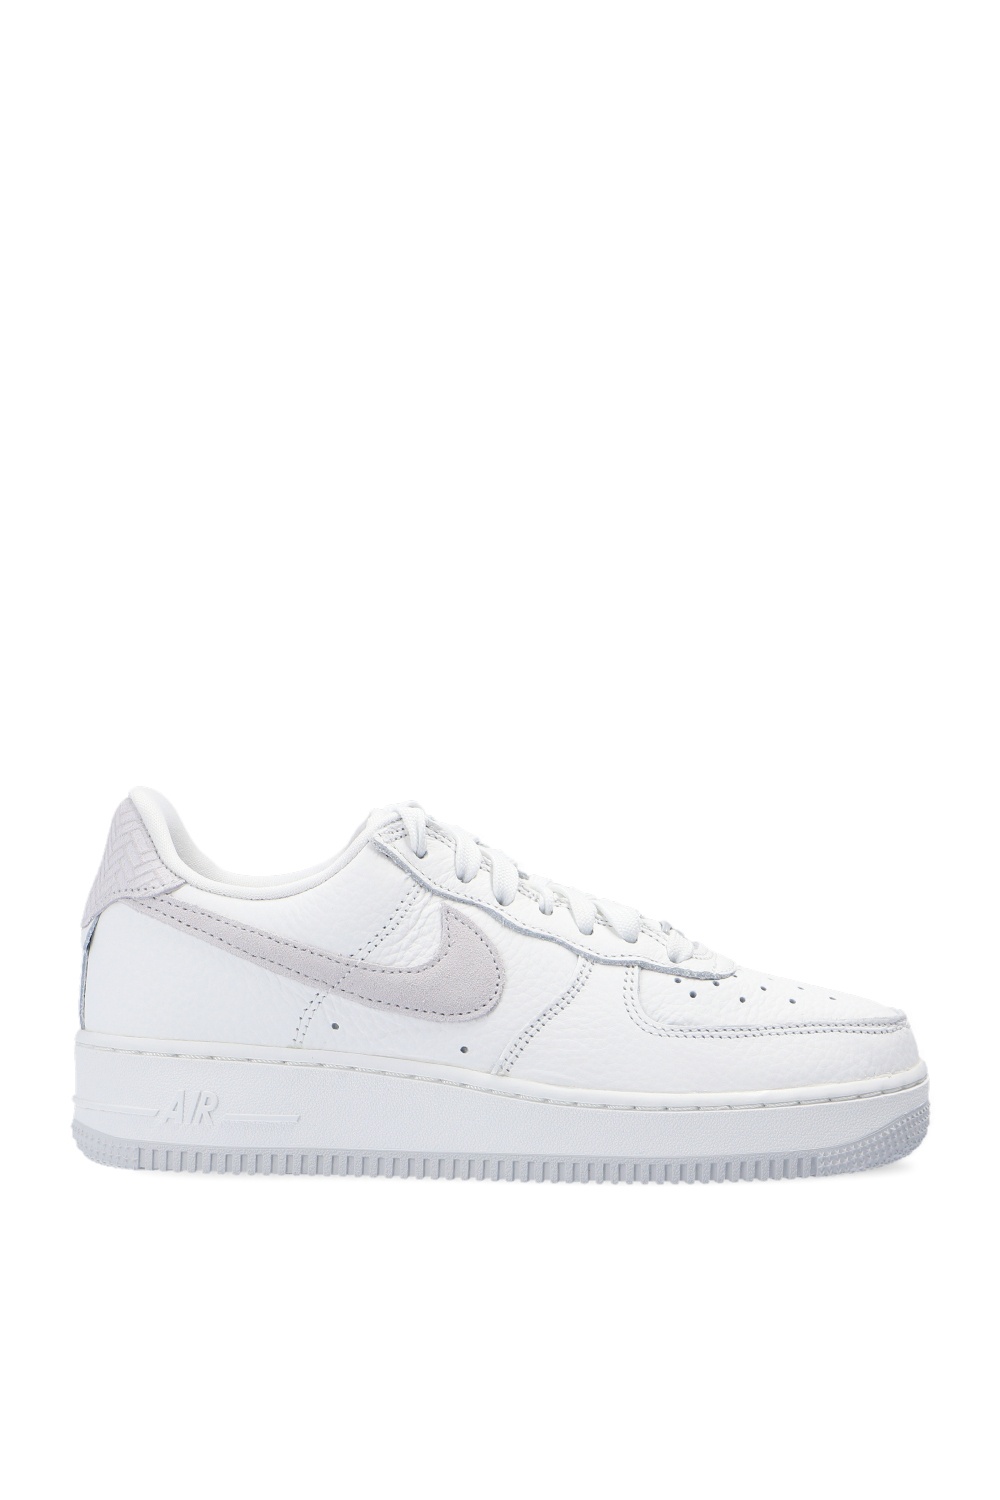 nike air force 1 07 size guide